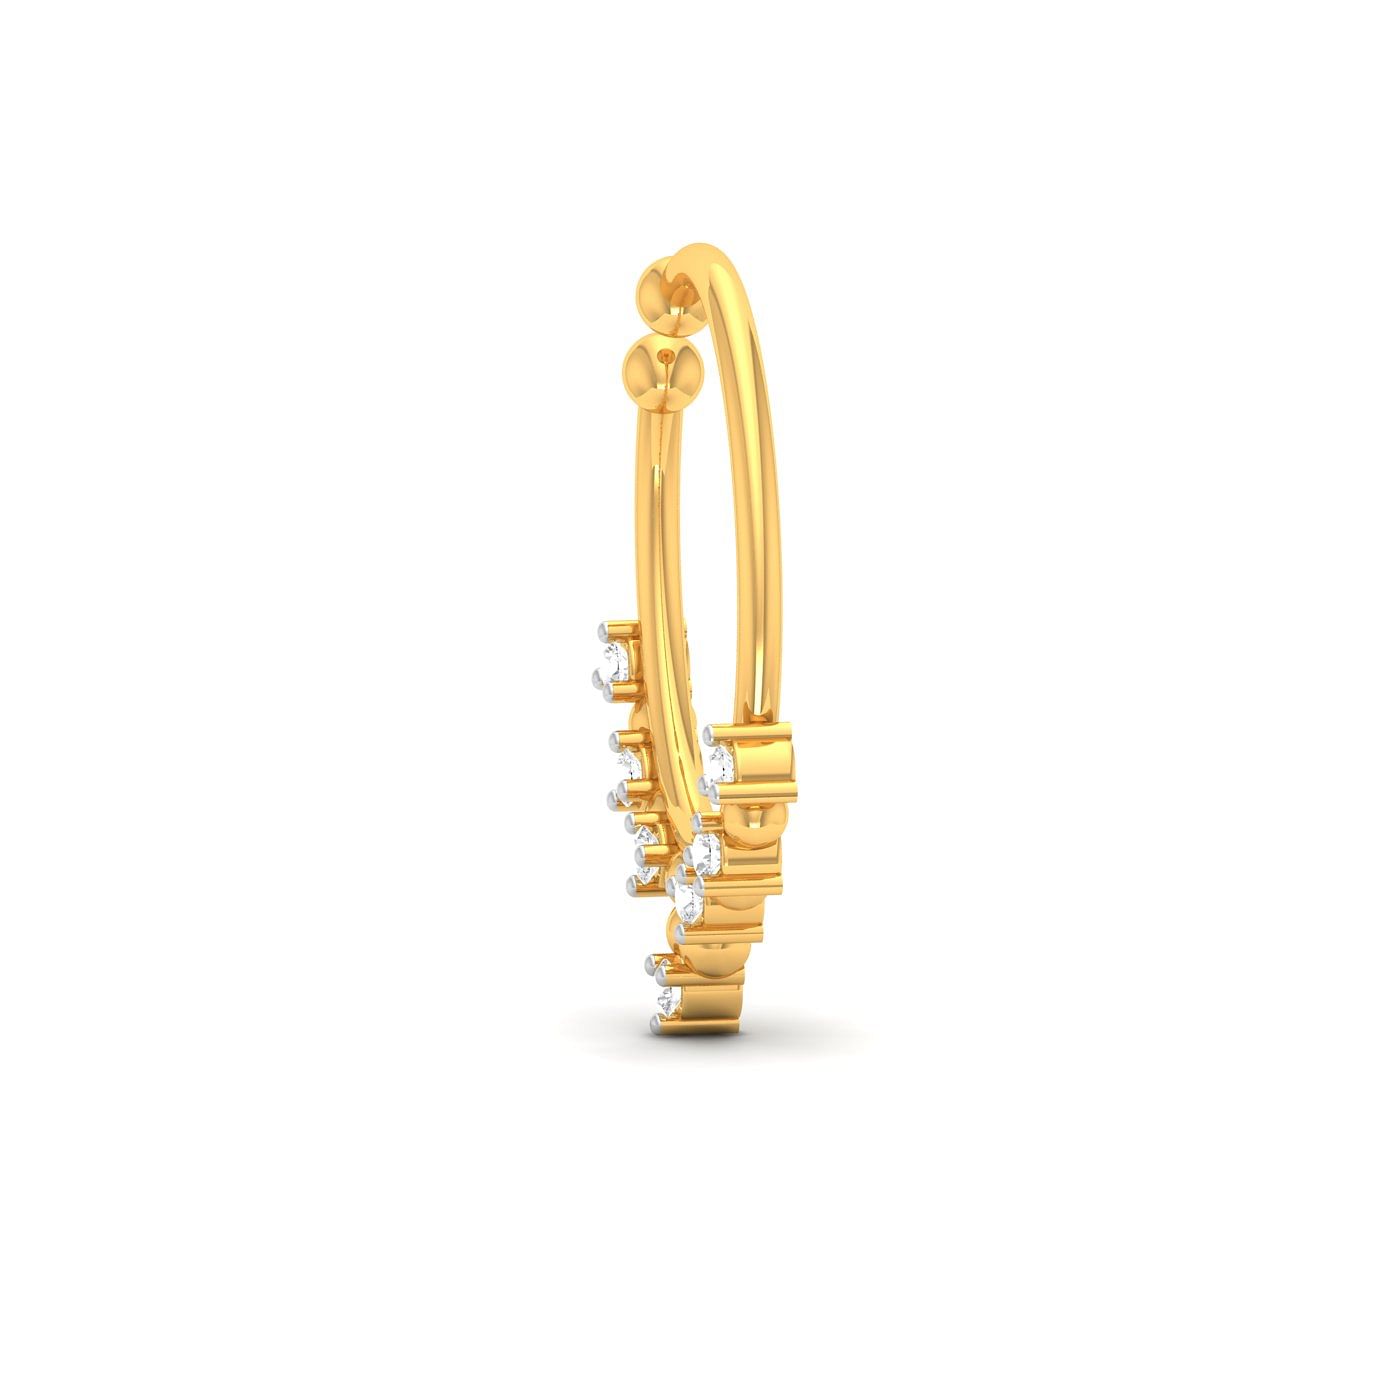 Unni Tribal Style Nose Pin With Yellow Gold